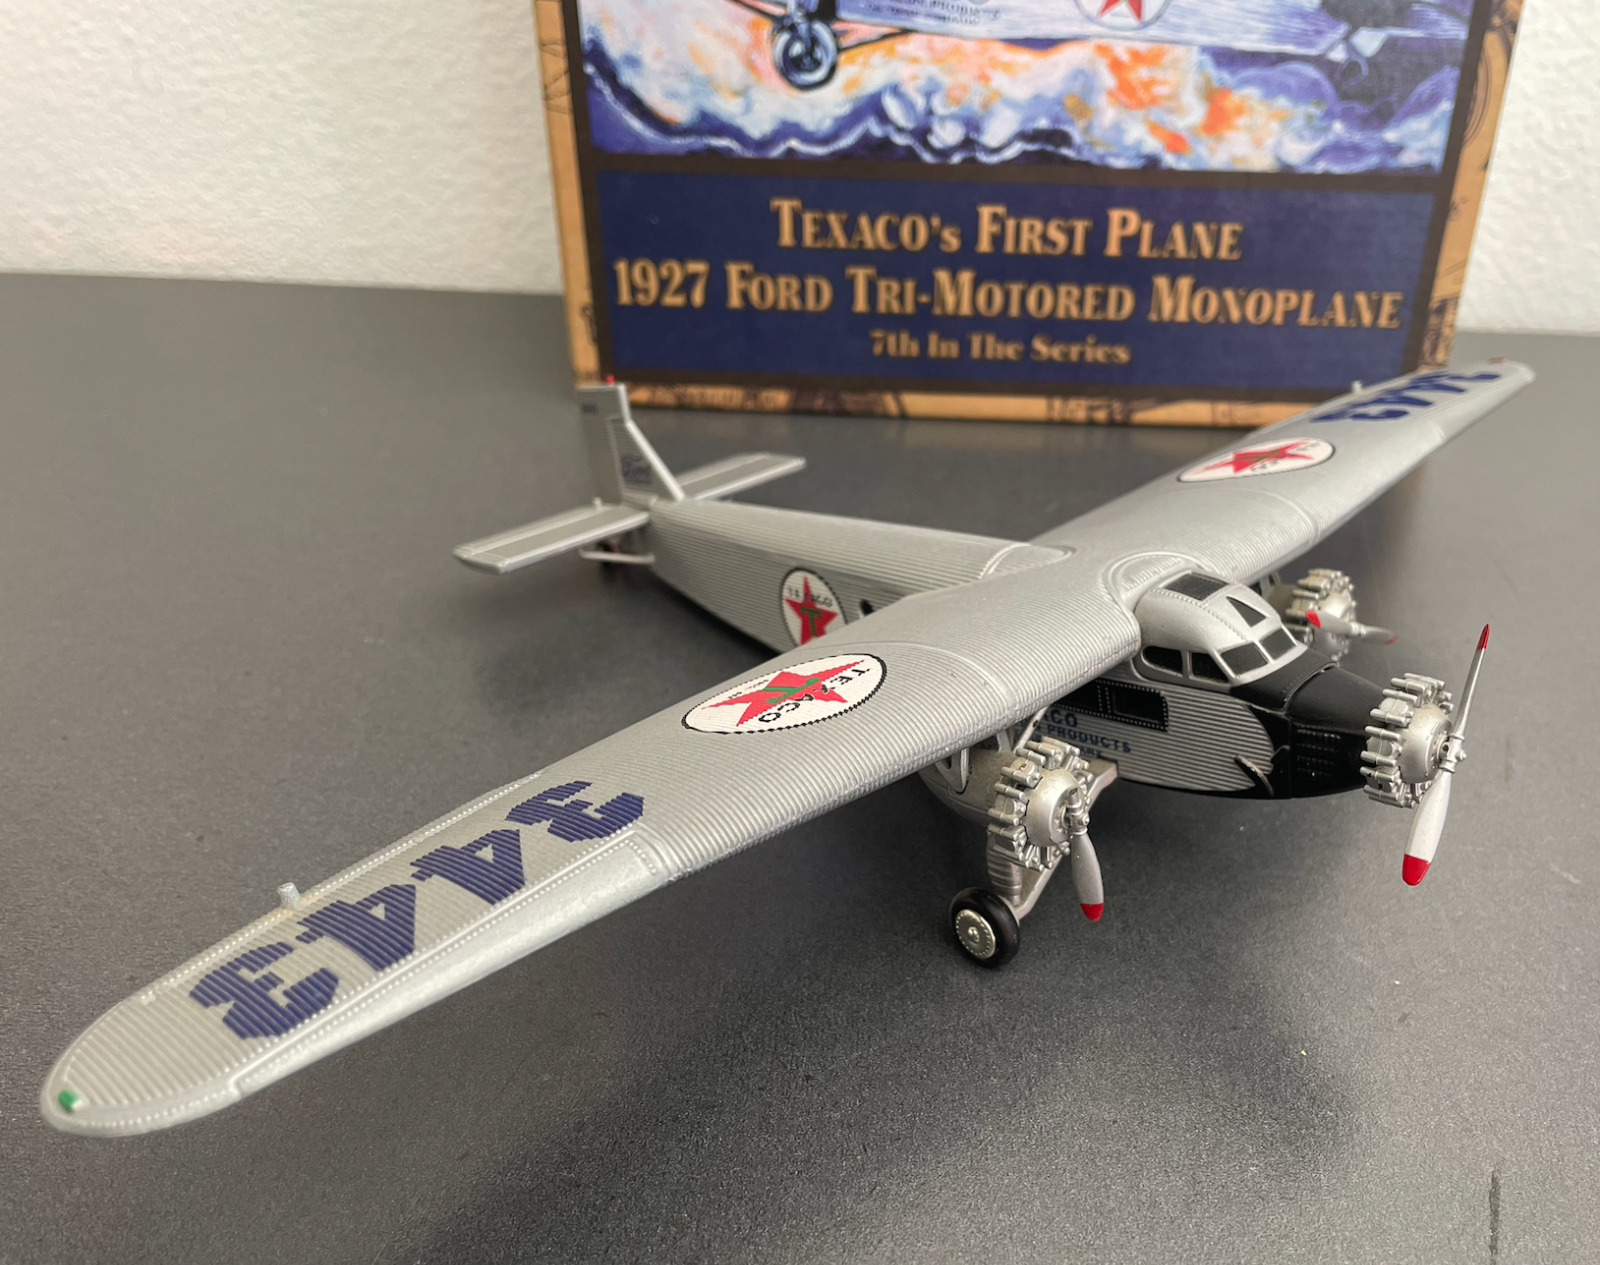 1999 WINGS OF TEXACO FIRST PLANE 1927 FORD TRI-MOTORED MONOPLANE GRAY COIN BANK